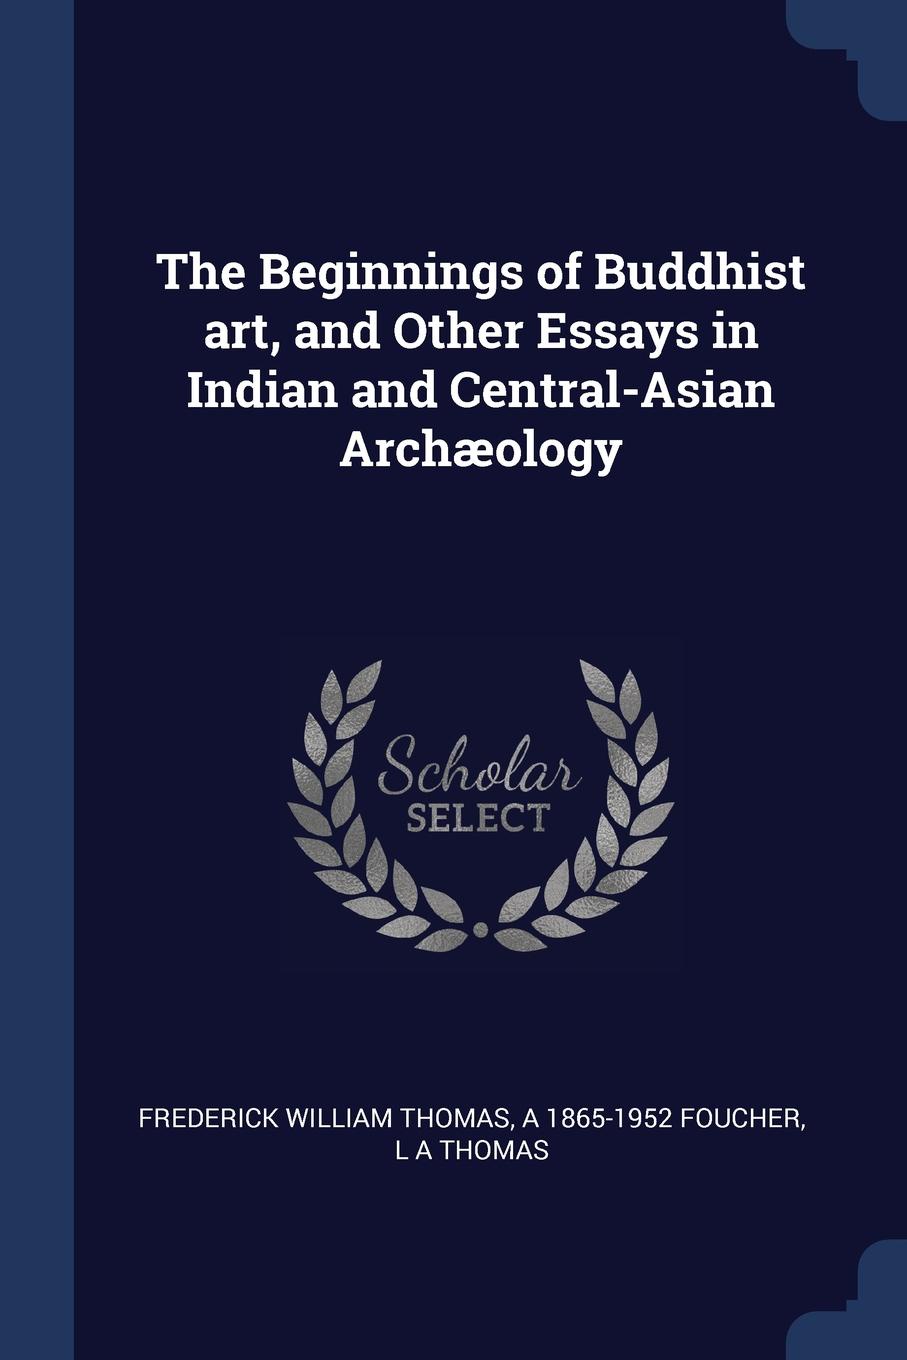 The Beginnings of Buddhist art, and Other Essays in Indian and Central-Asian Archaeology